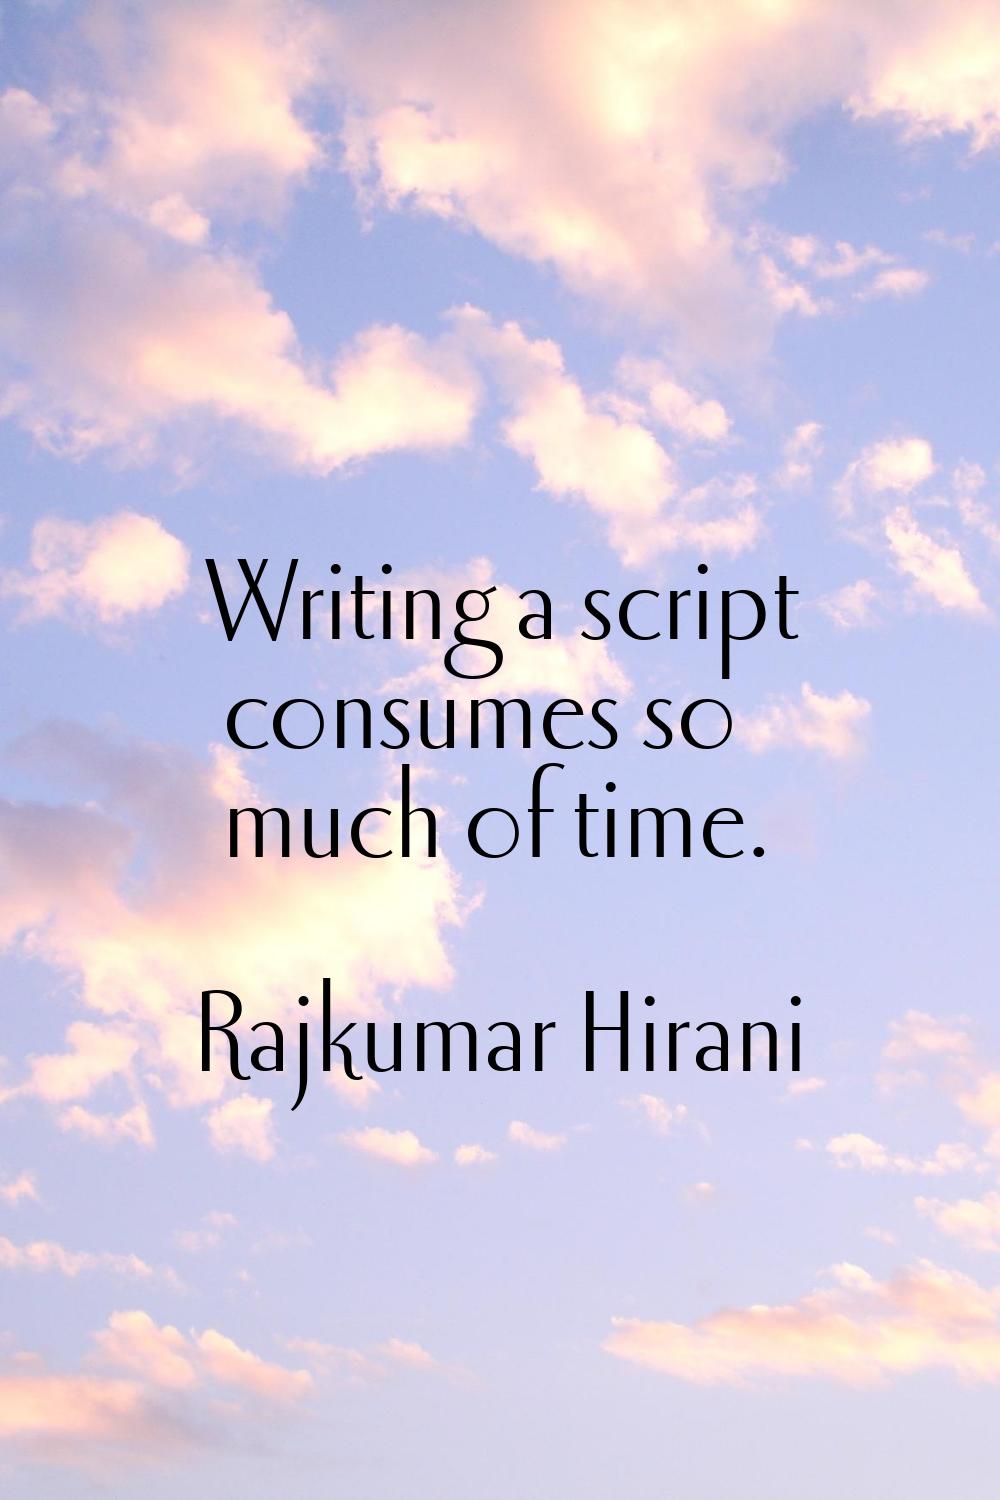 Writing a script consumes so much of time.